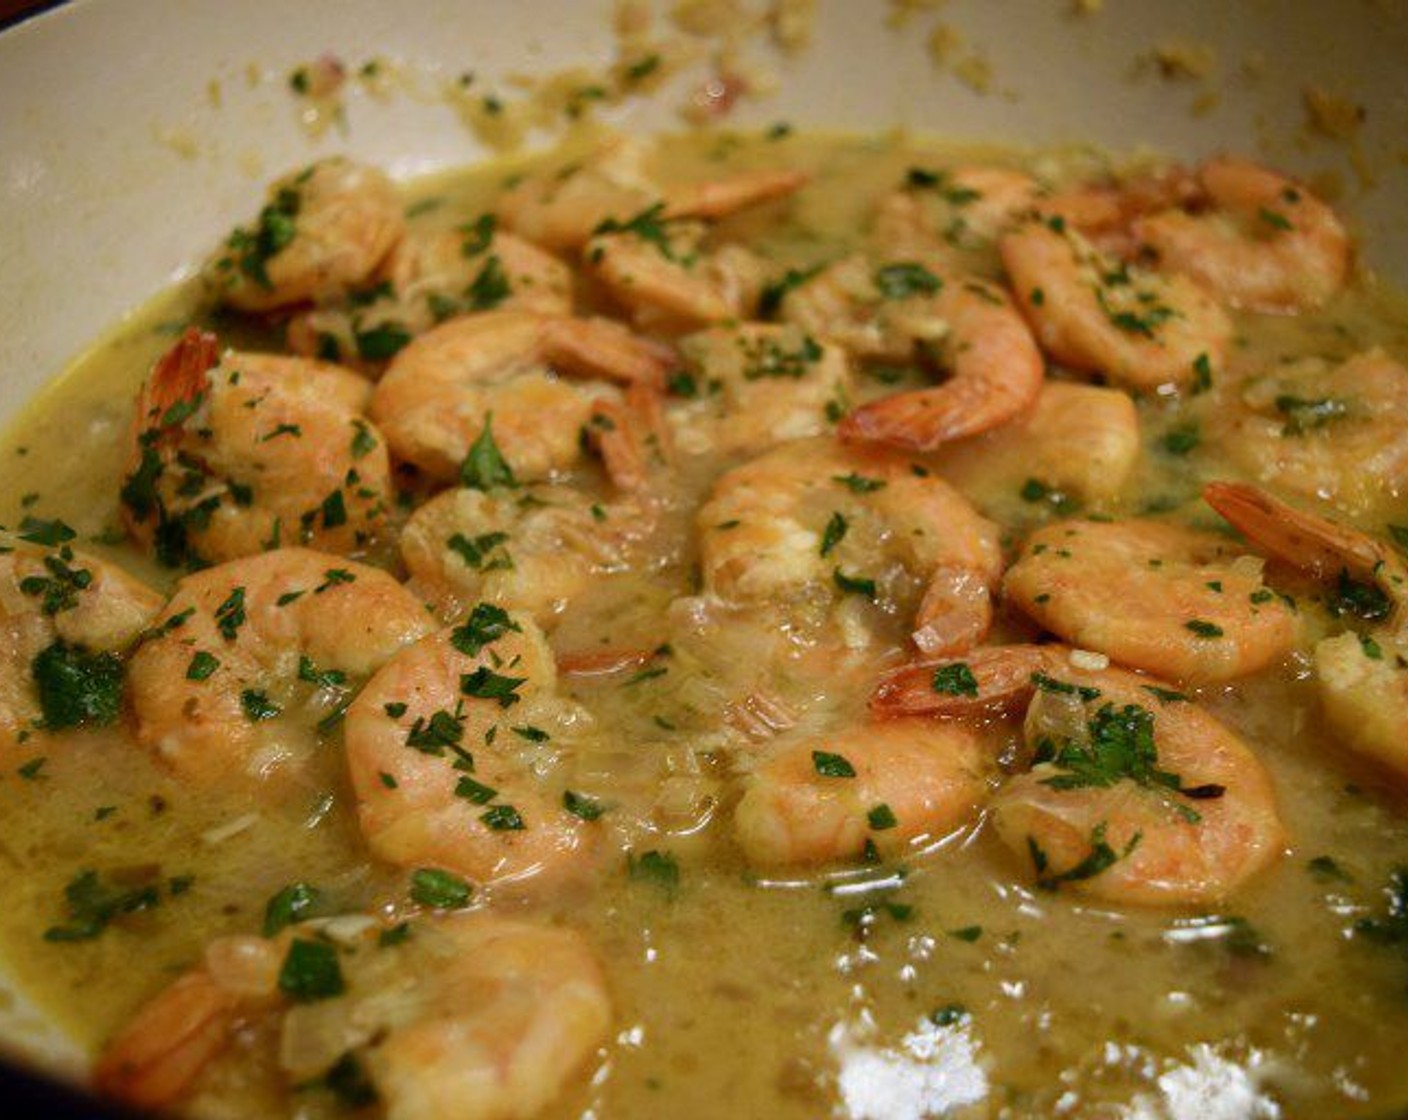 step 5 Turn the heat down to low and cook for 5-7 minutes until the shrimp are pink and cooked through. Top with Fresh Parsley (to taste) and serve with bread or french fries.